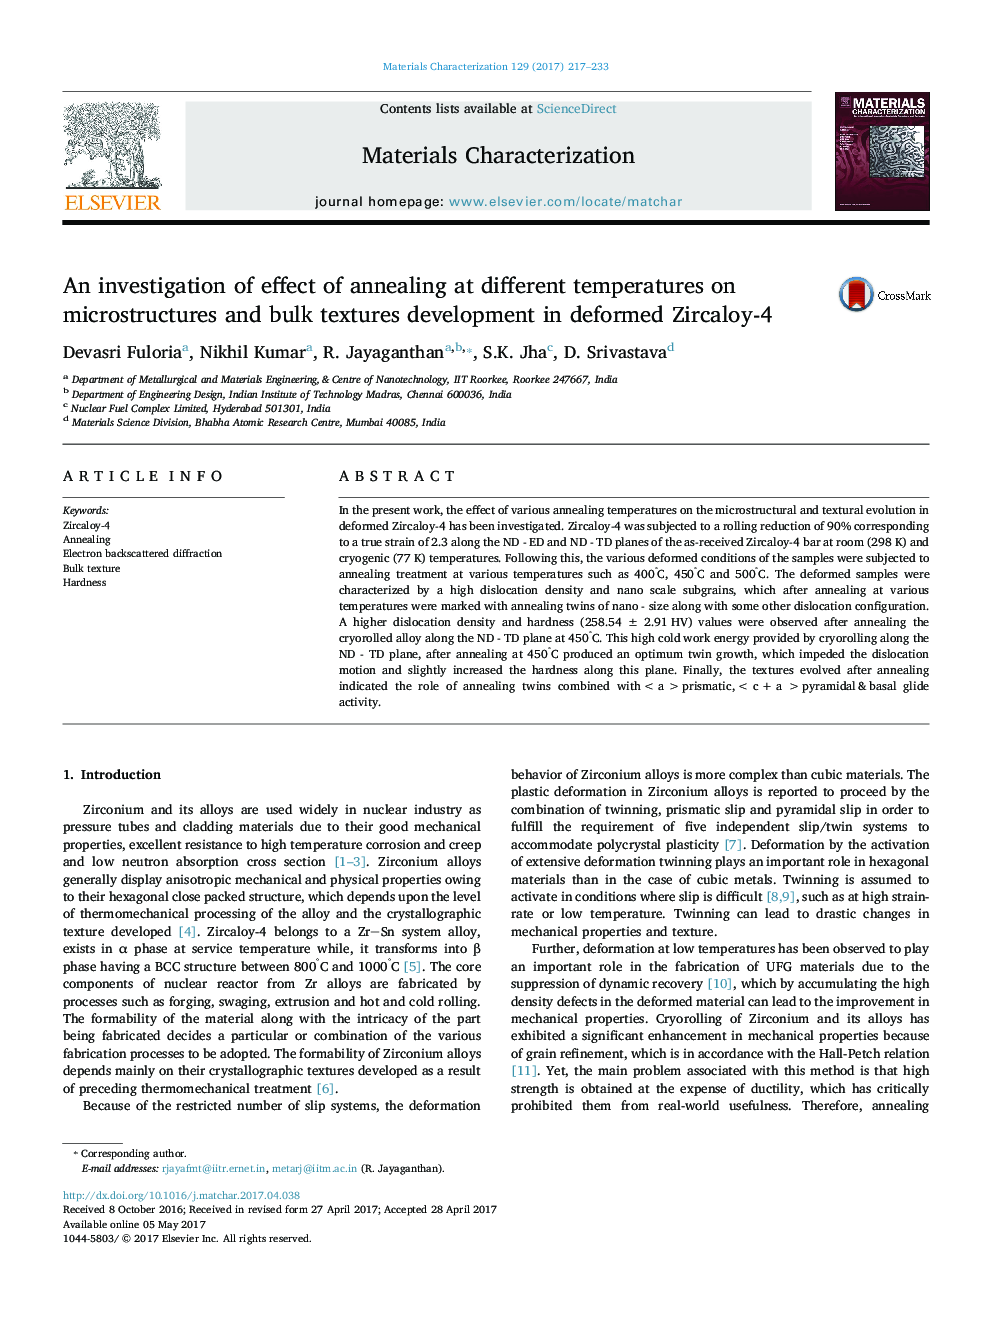 An investigation of effect of annealing at different temperatures on microstructures and bulk textures development in deformed Zircaloy-4